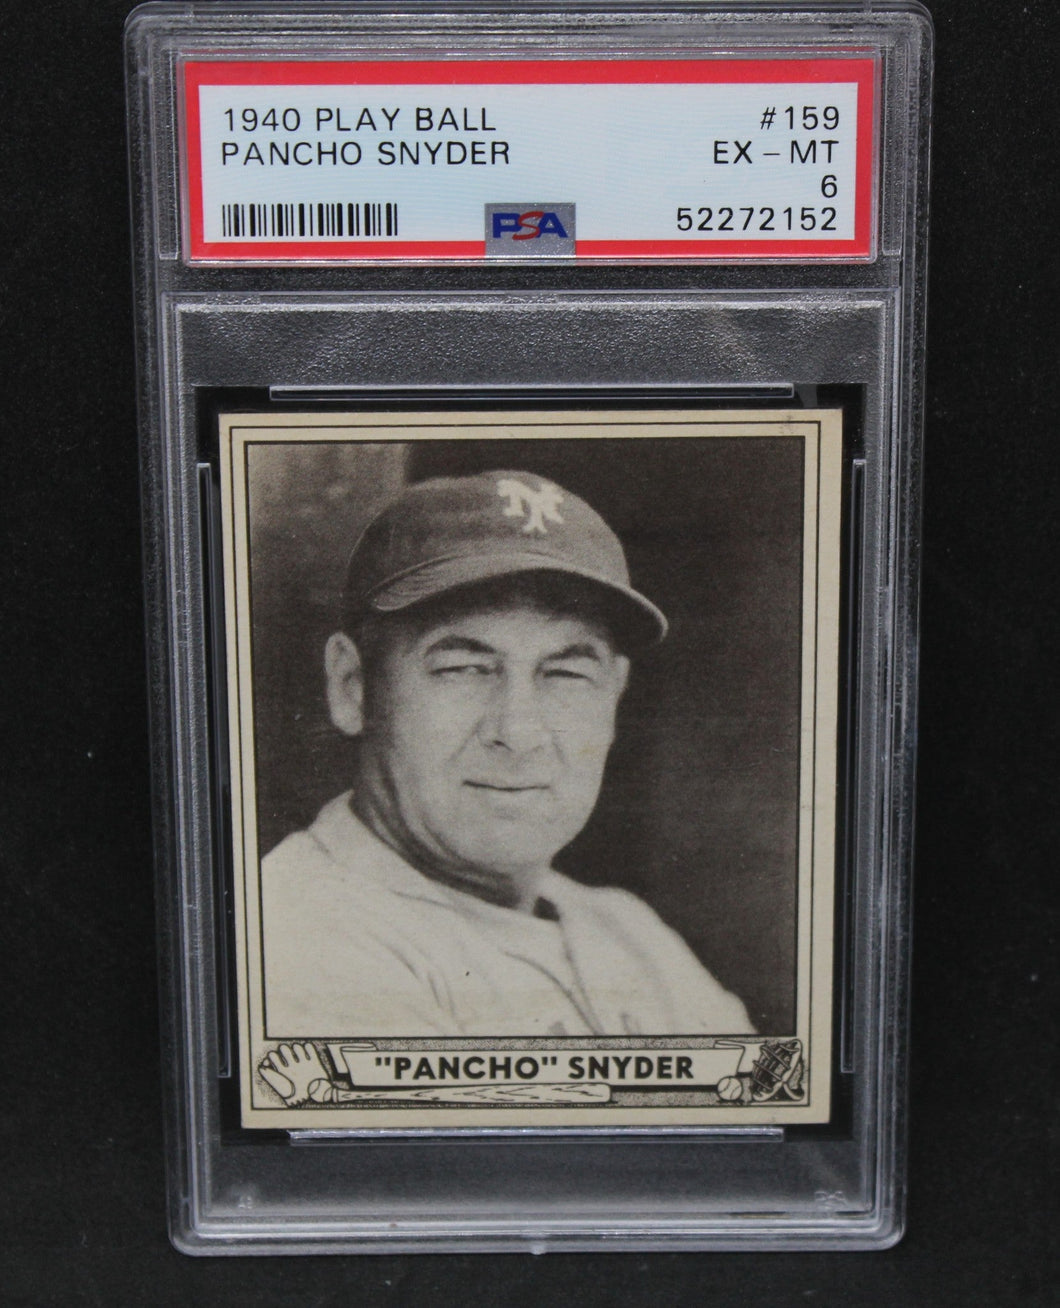 1940 Play Ball Pancho Snyder #159 PSA Graded EX-MT 6 Card